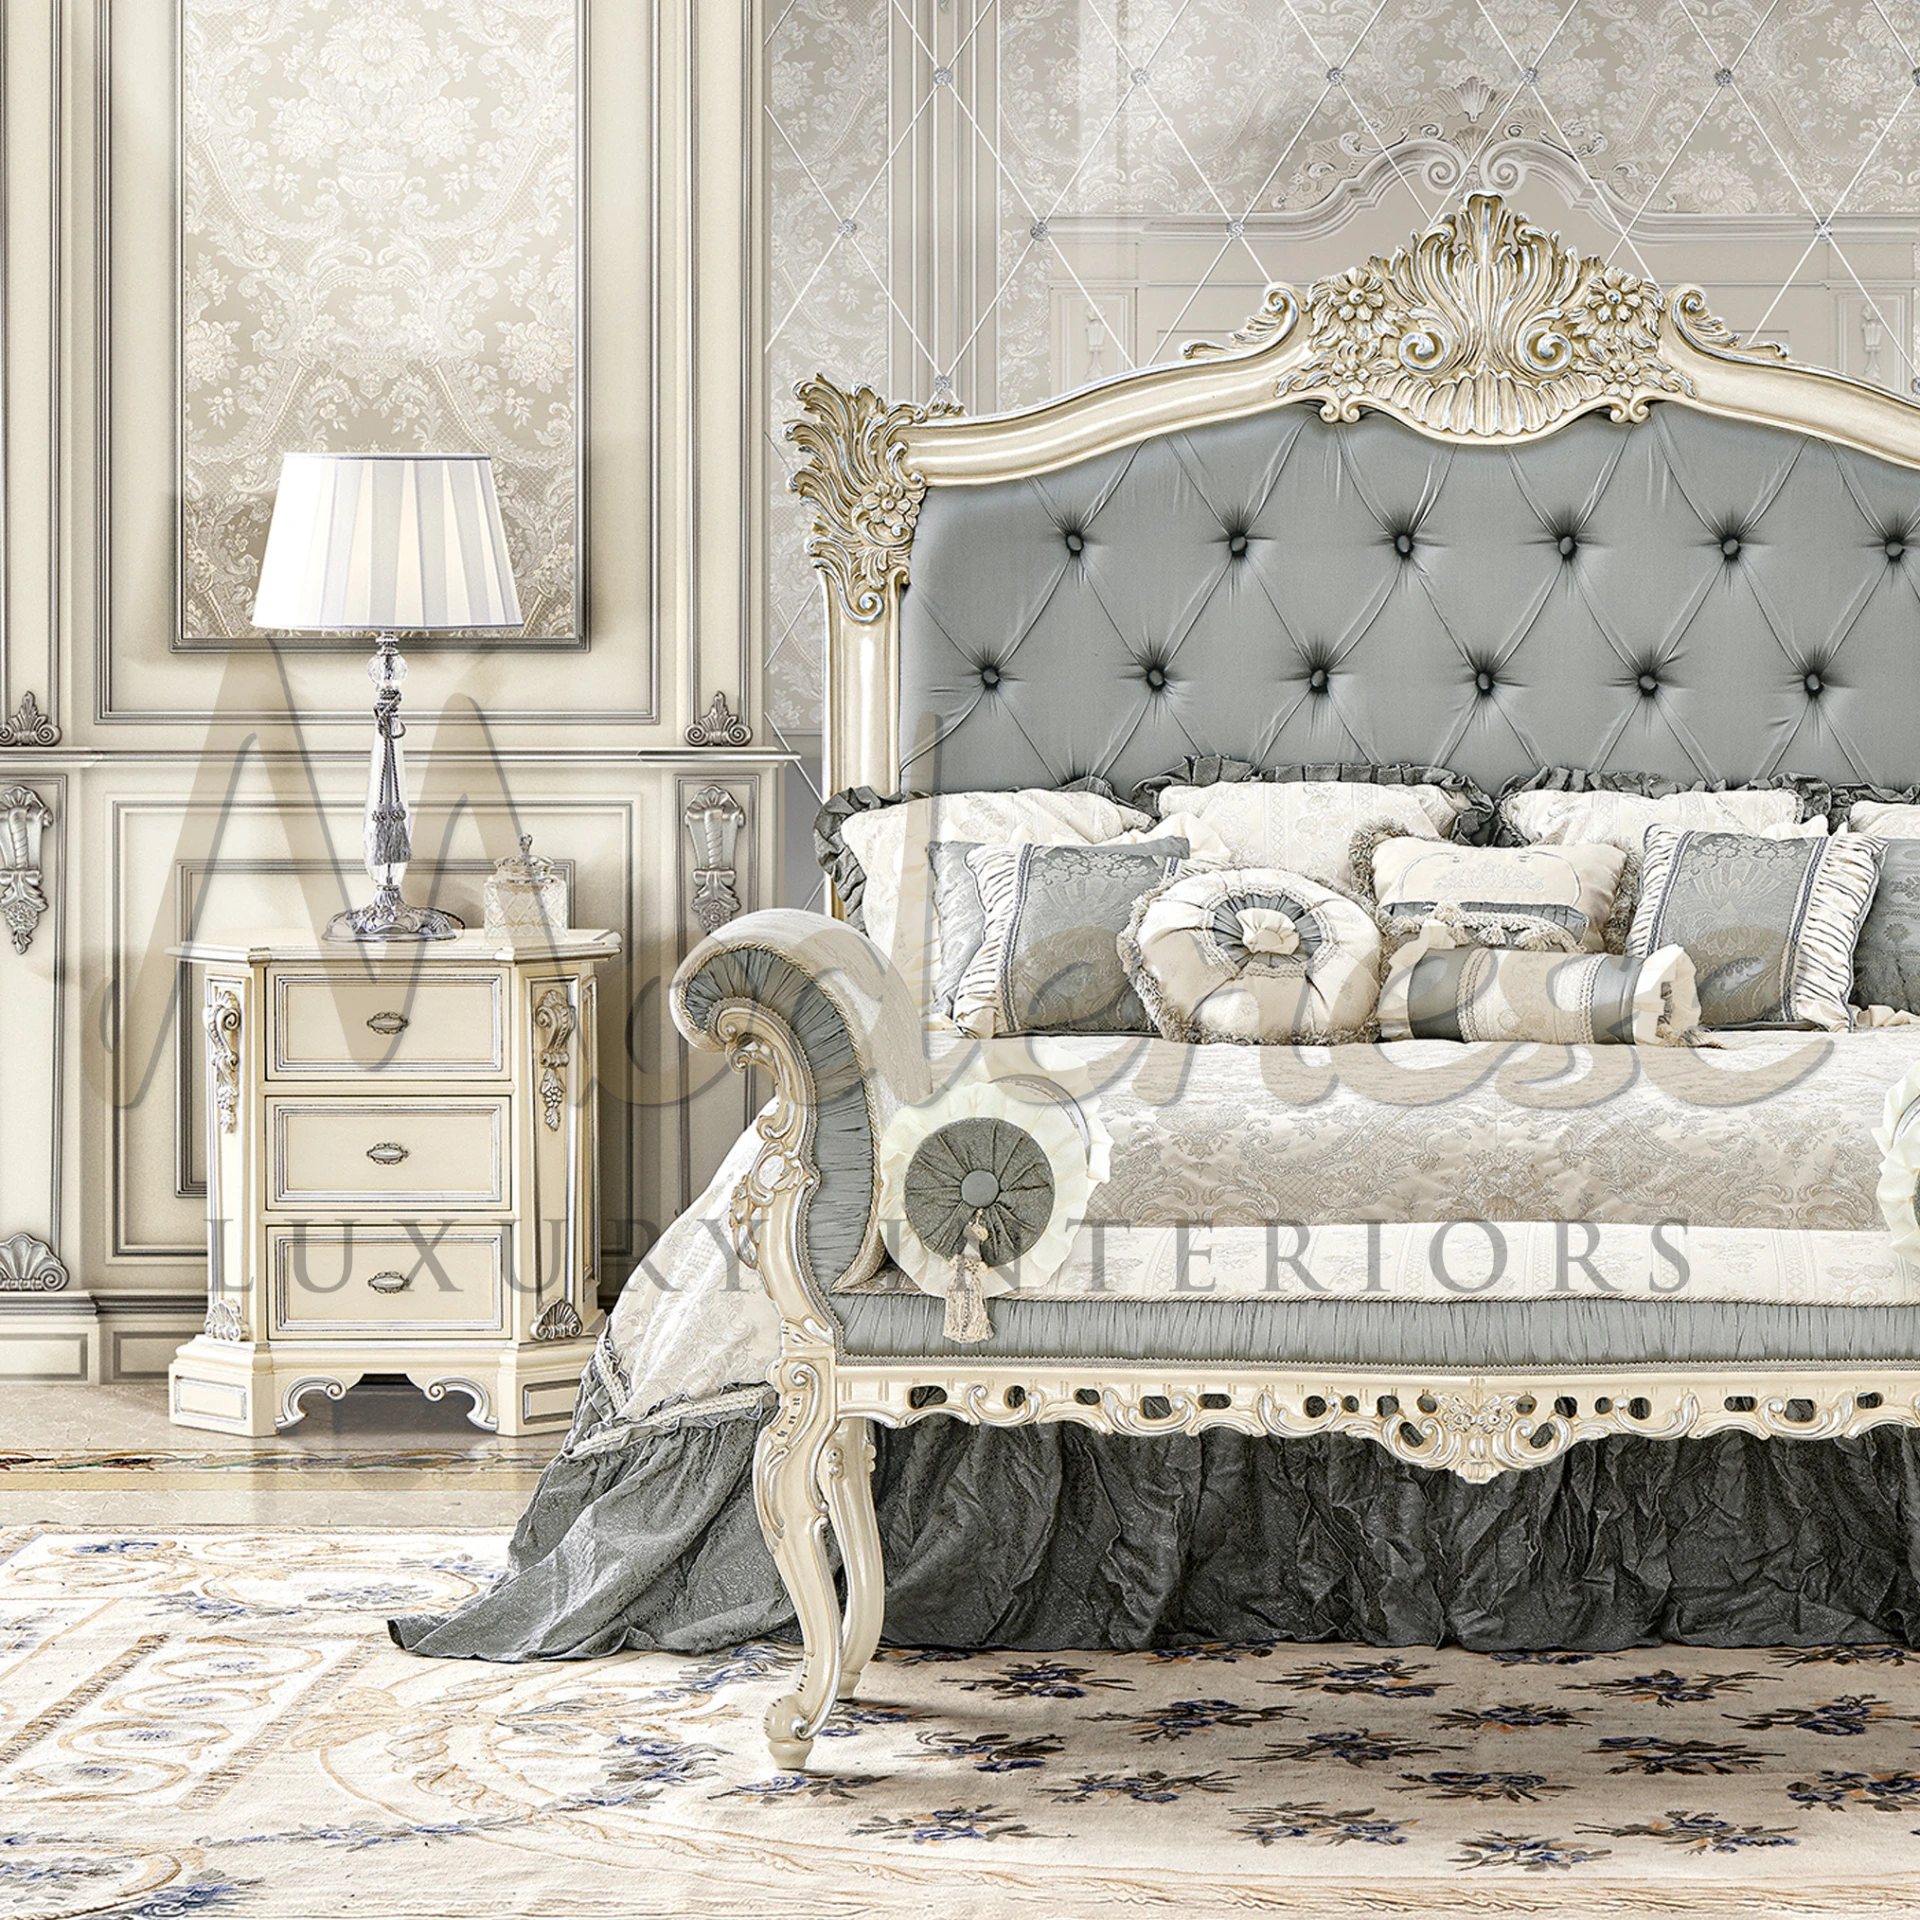 Luxury bedroom decor with a luxurious and stylish table lamp and a grand tufted bed